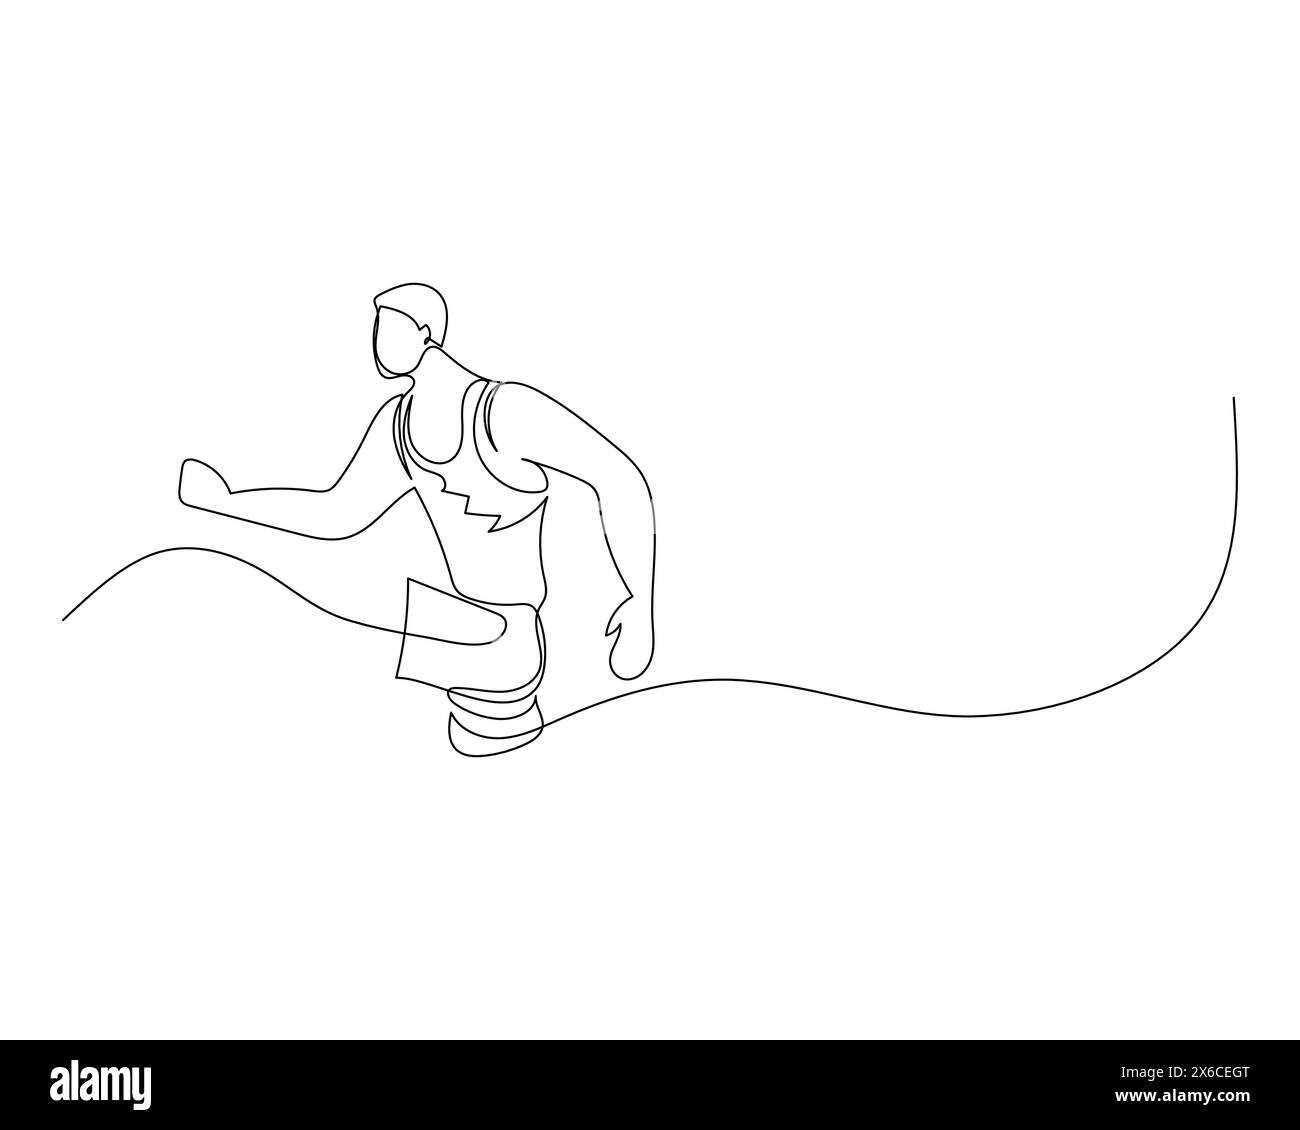 Continuous single line drawing of Disabled man takes part in a running race. Healthy sport training concept. Competition event design illustration Stock Vector